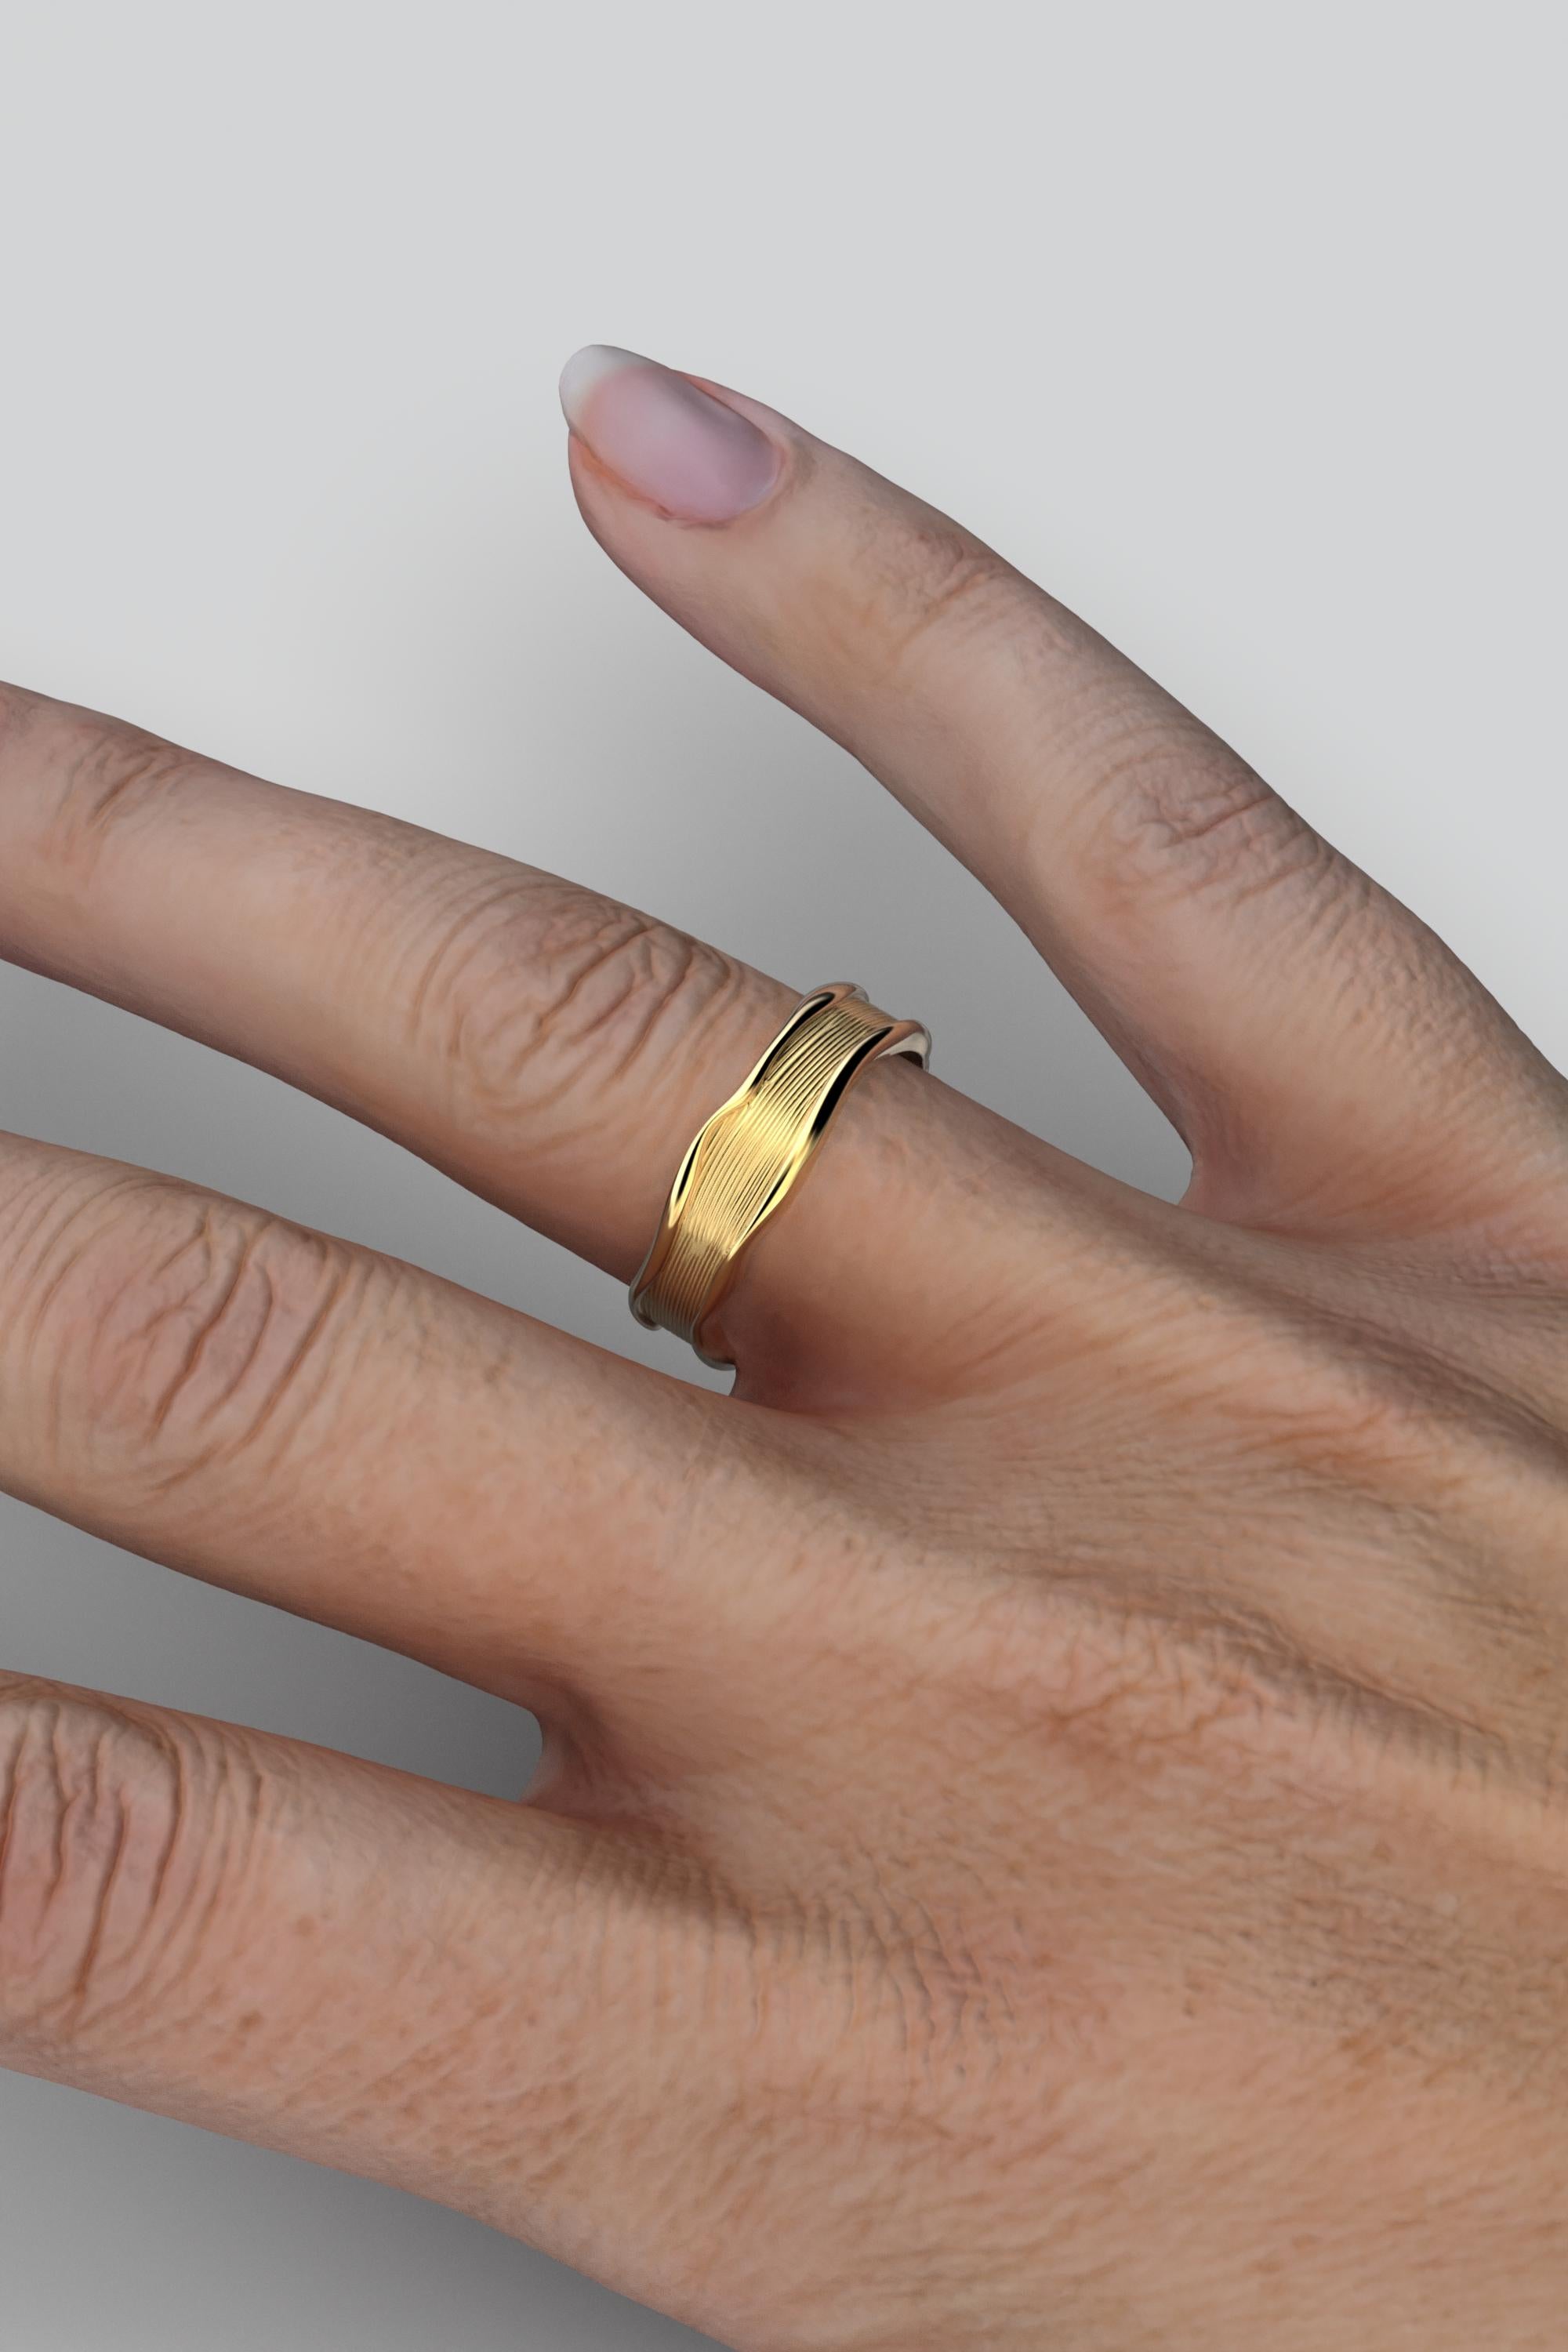 For Sale:  Unisex 18k Gold Band Ring with Hand-Engraved Organic Design Made in Italy 2